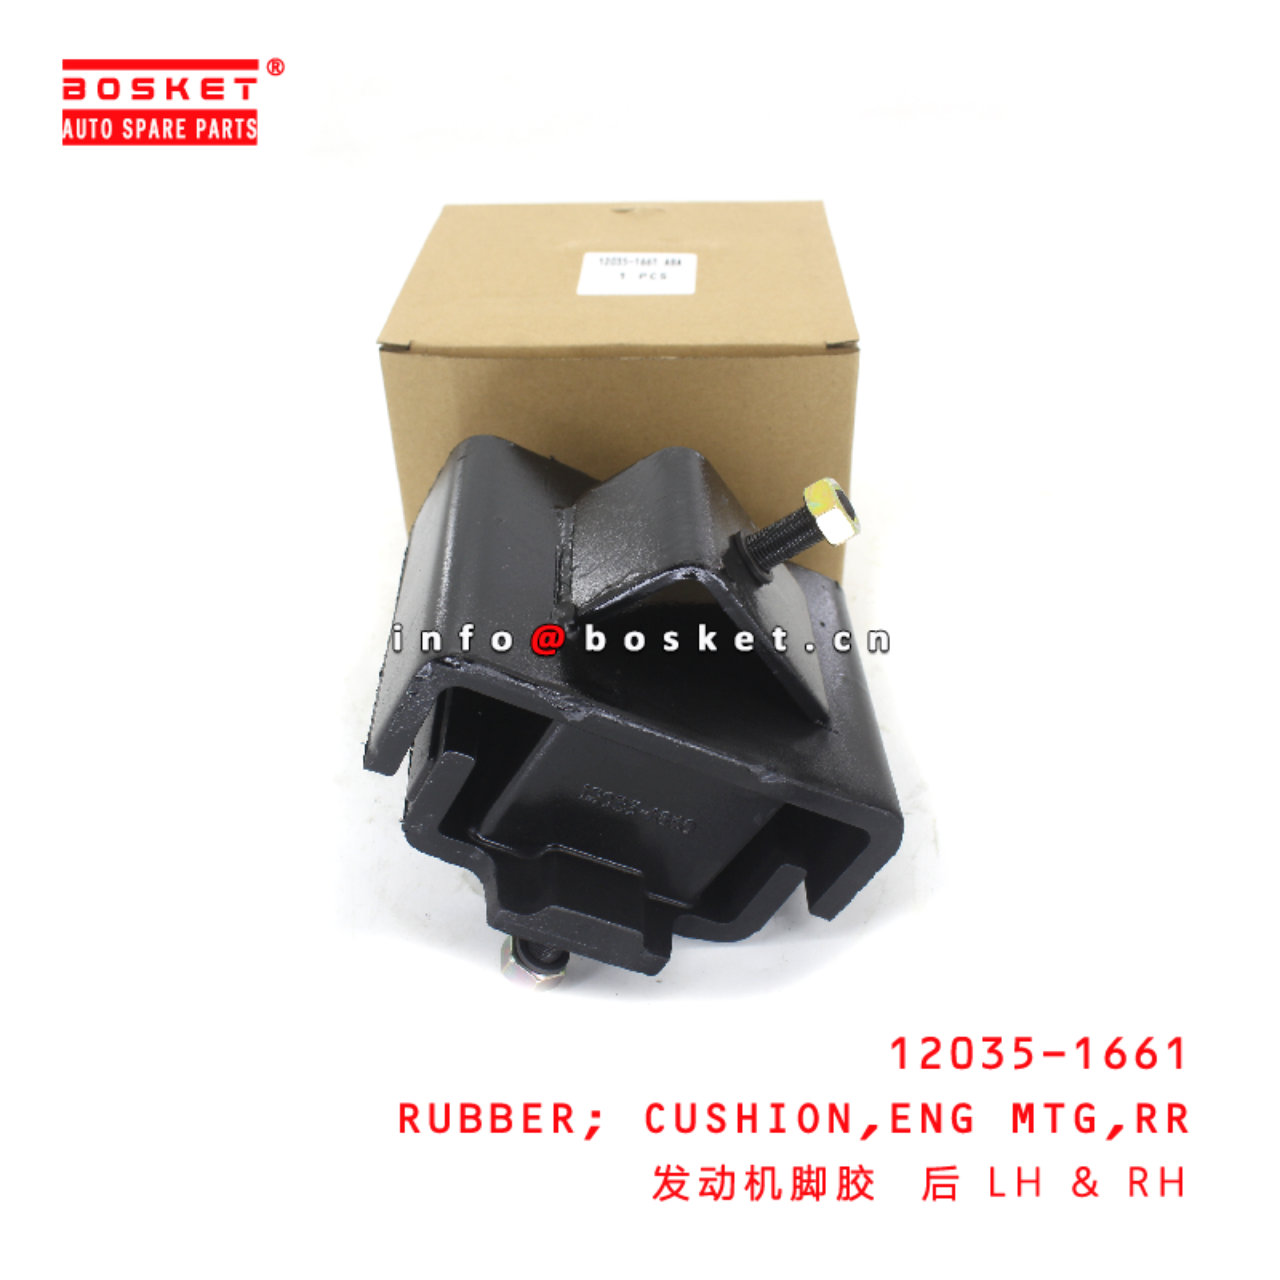 12035-1661 Rear Engine Mounting Cushion Rubber suitable for ISUZU HINO 500 J08C